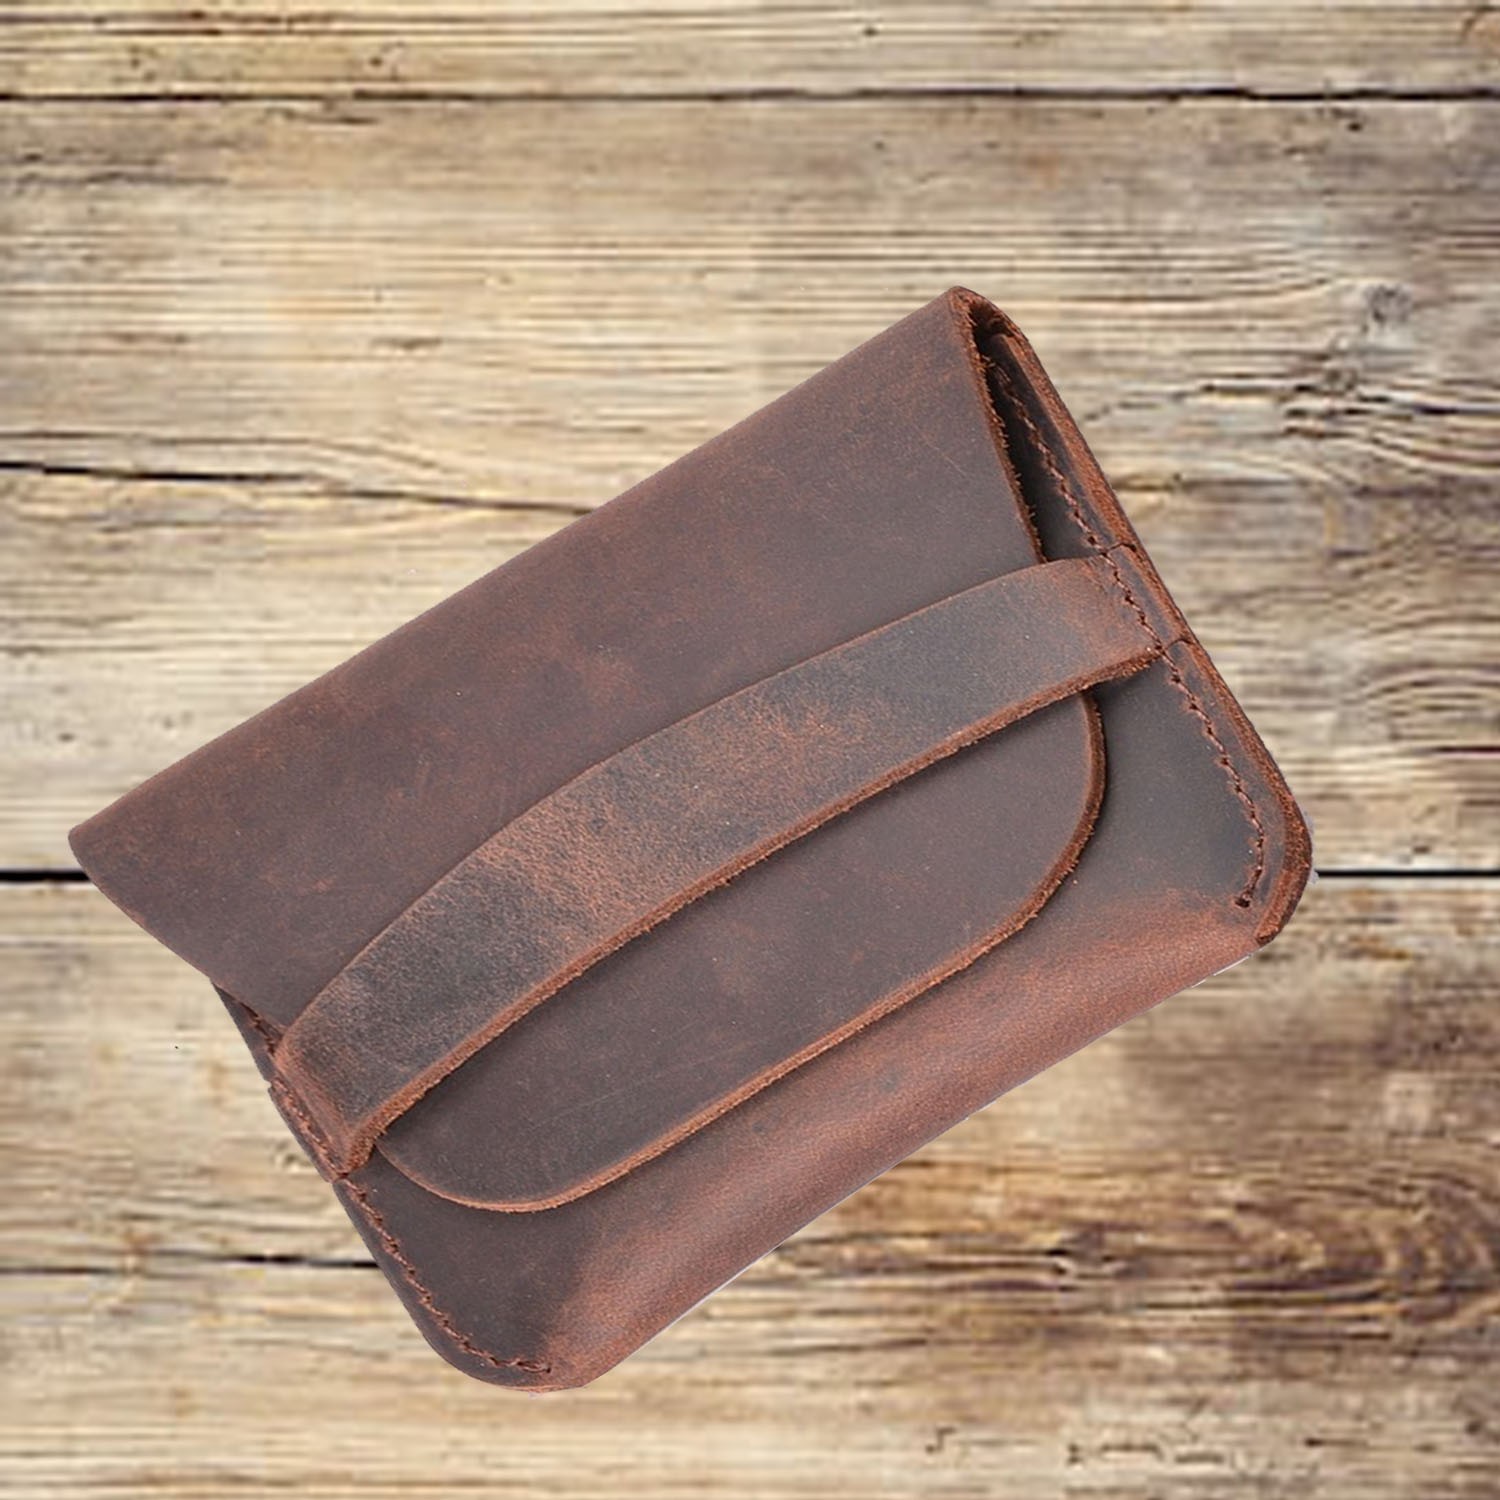 Flap over black leather card wallet